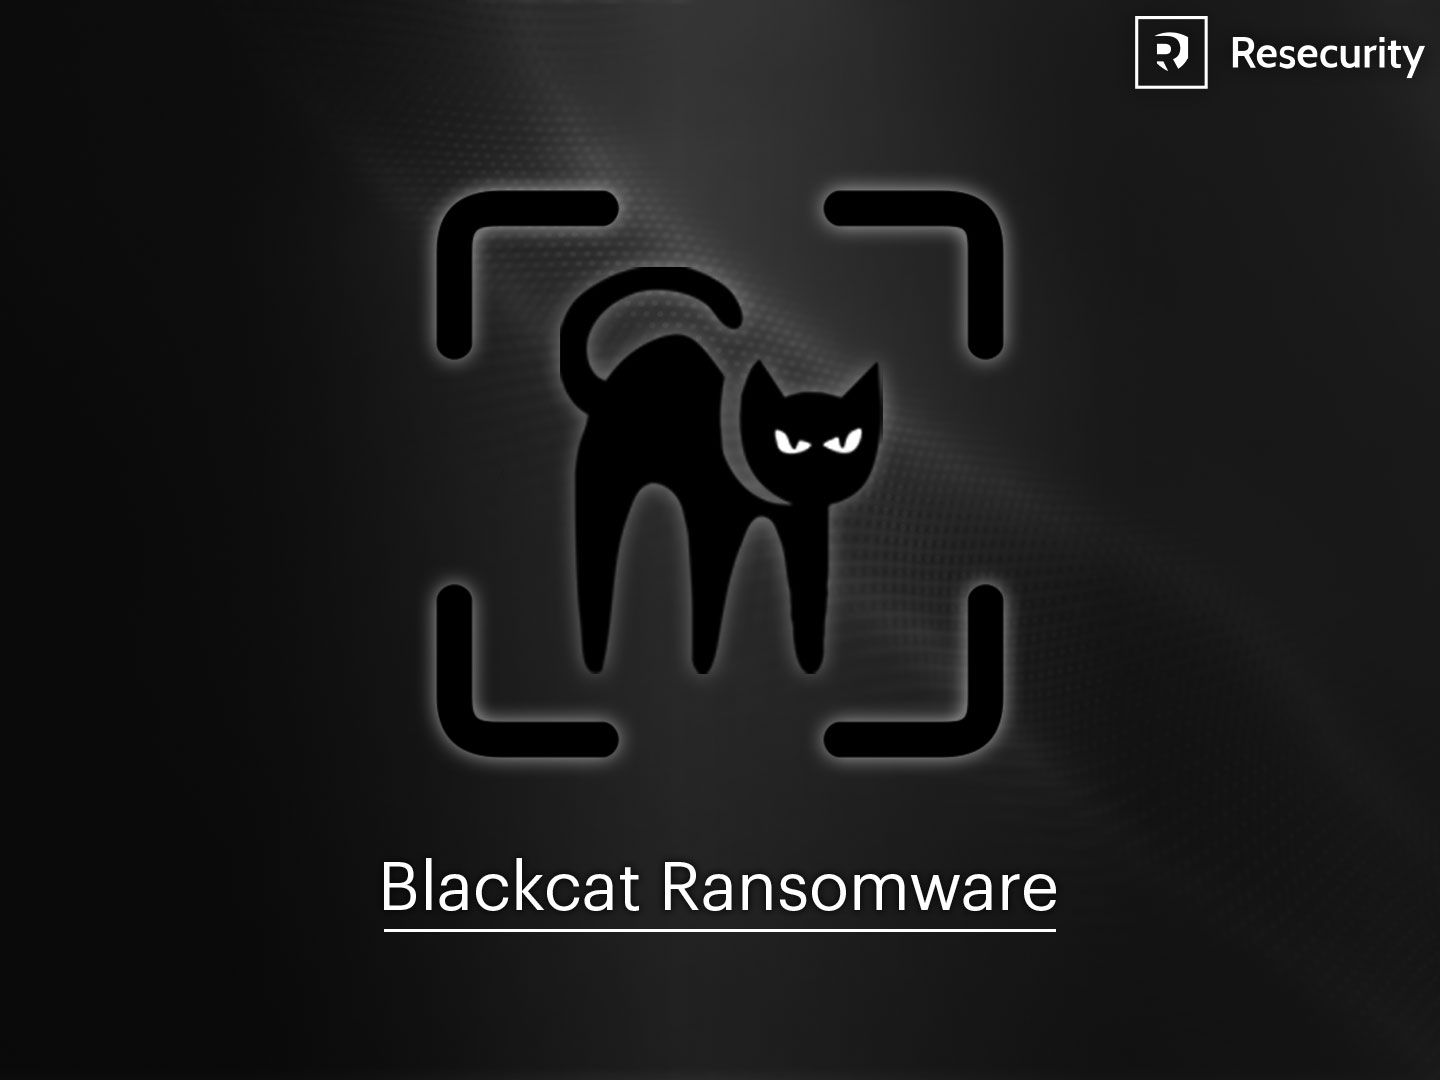 BlackCat (aka ALPHV) Ransomware is Increasing Stakes up to $2,5M in Demands